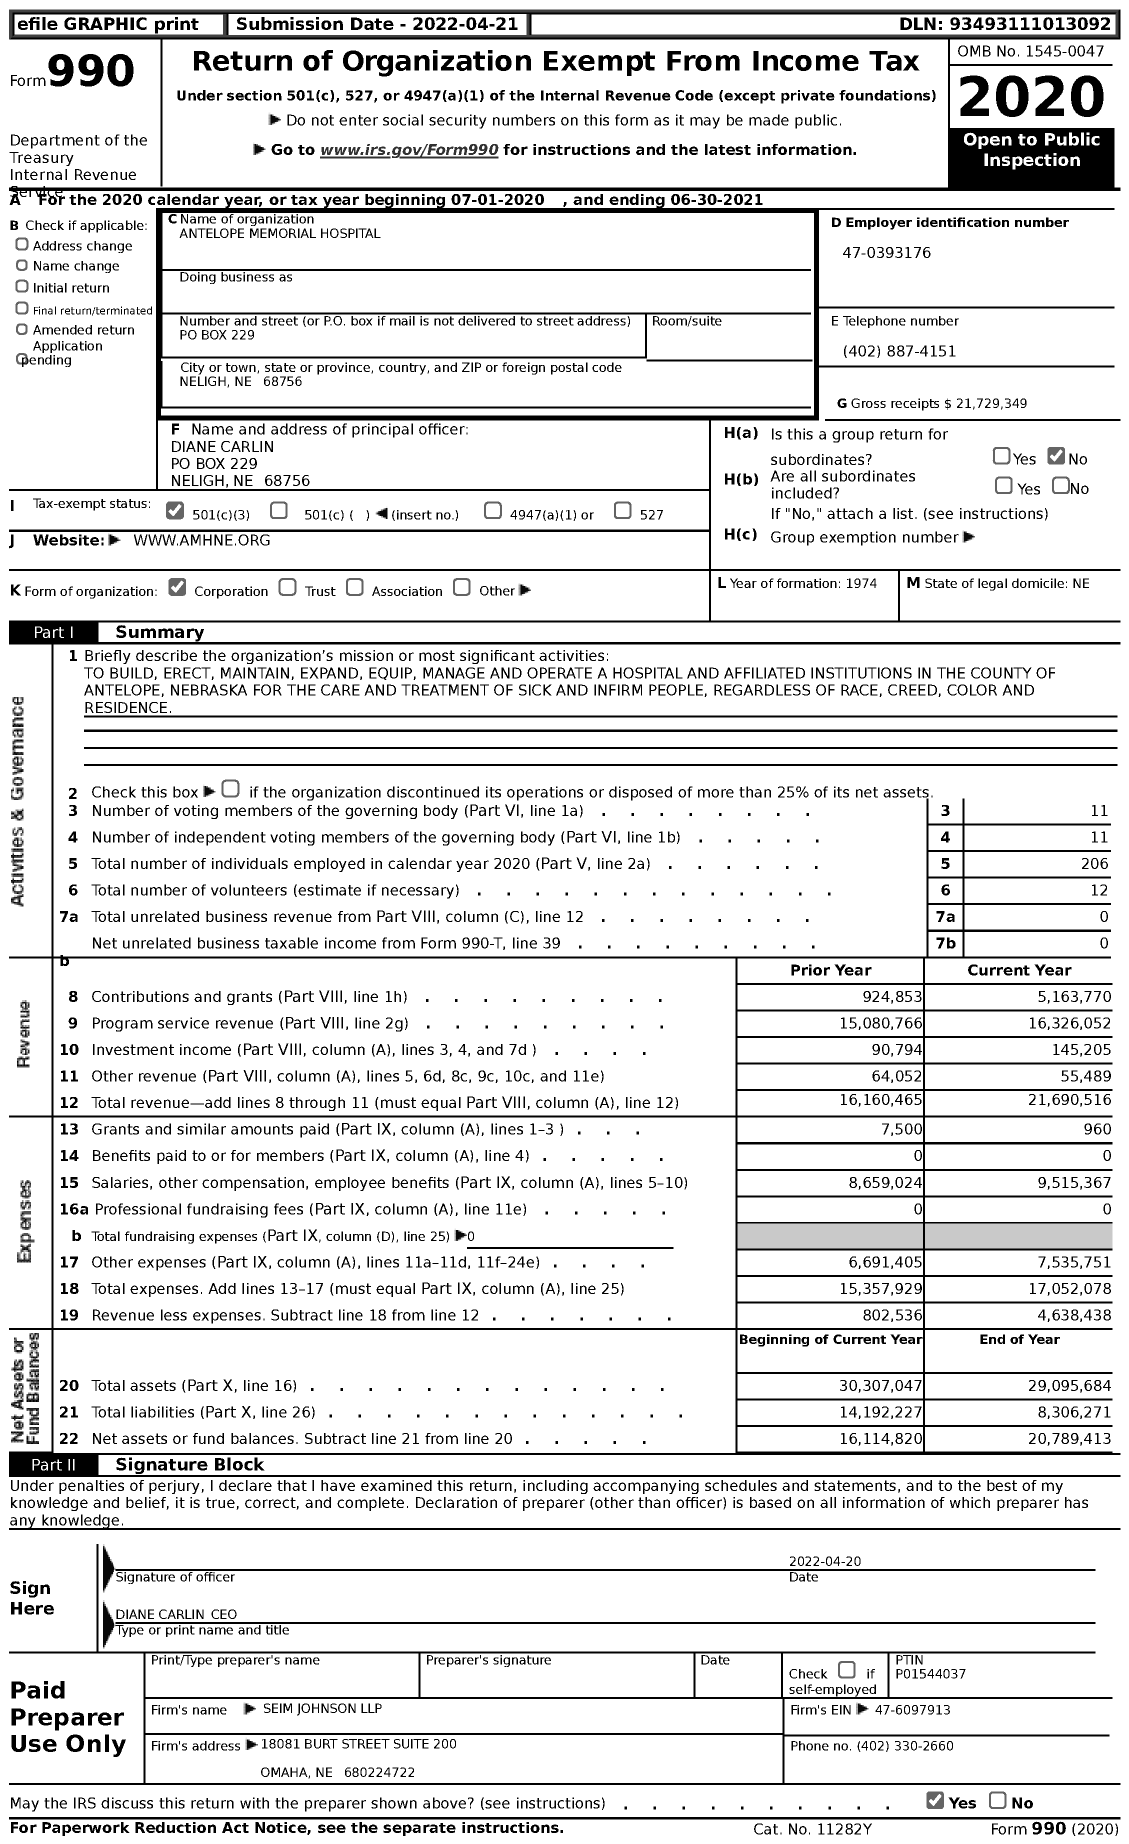 Image of first page of 2020 Form 990 for Antelope Memorial Hospital (AMH)